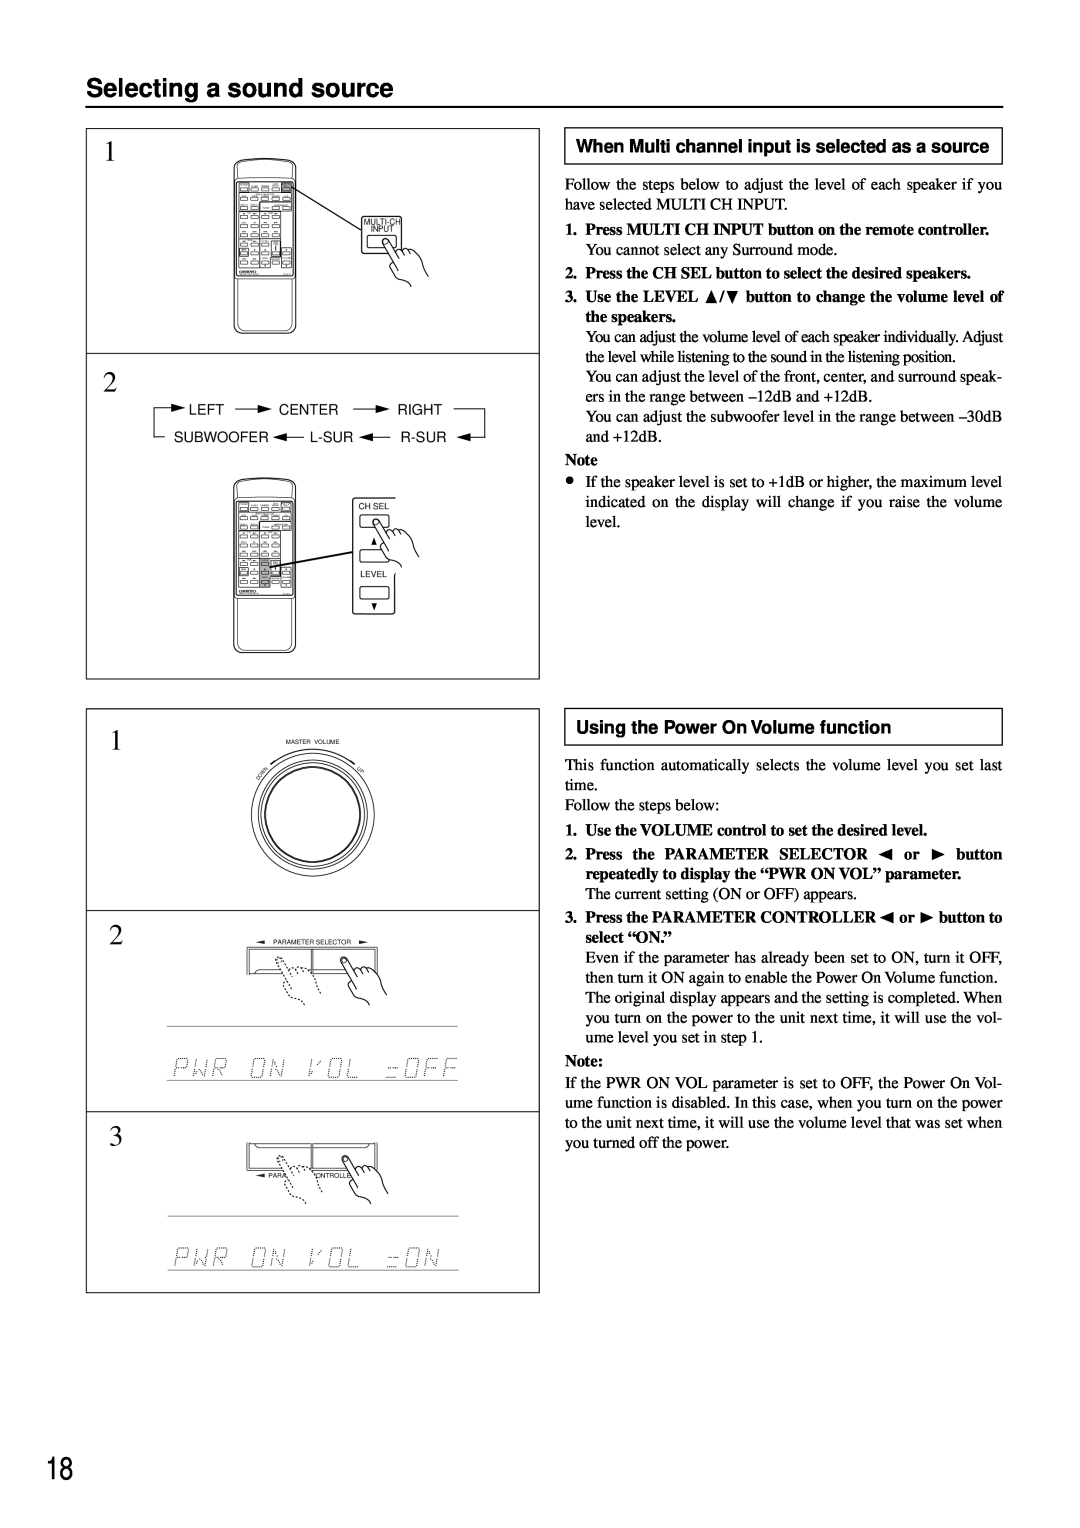 Onkyo TX-DS484 instruction manual Selecting a sound source, When Multi channel input is selected as a source 